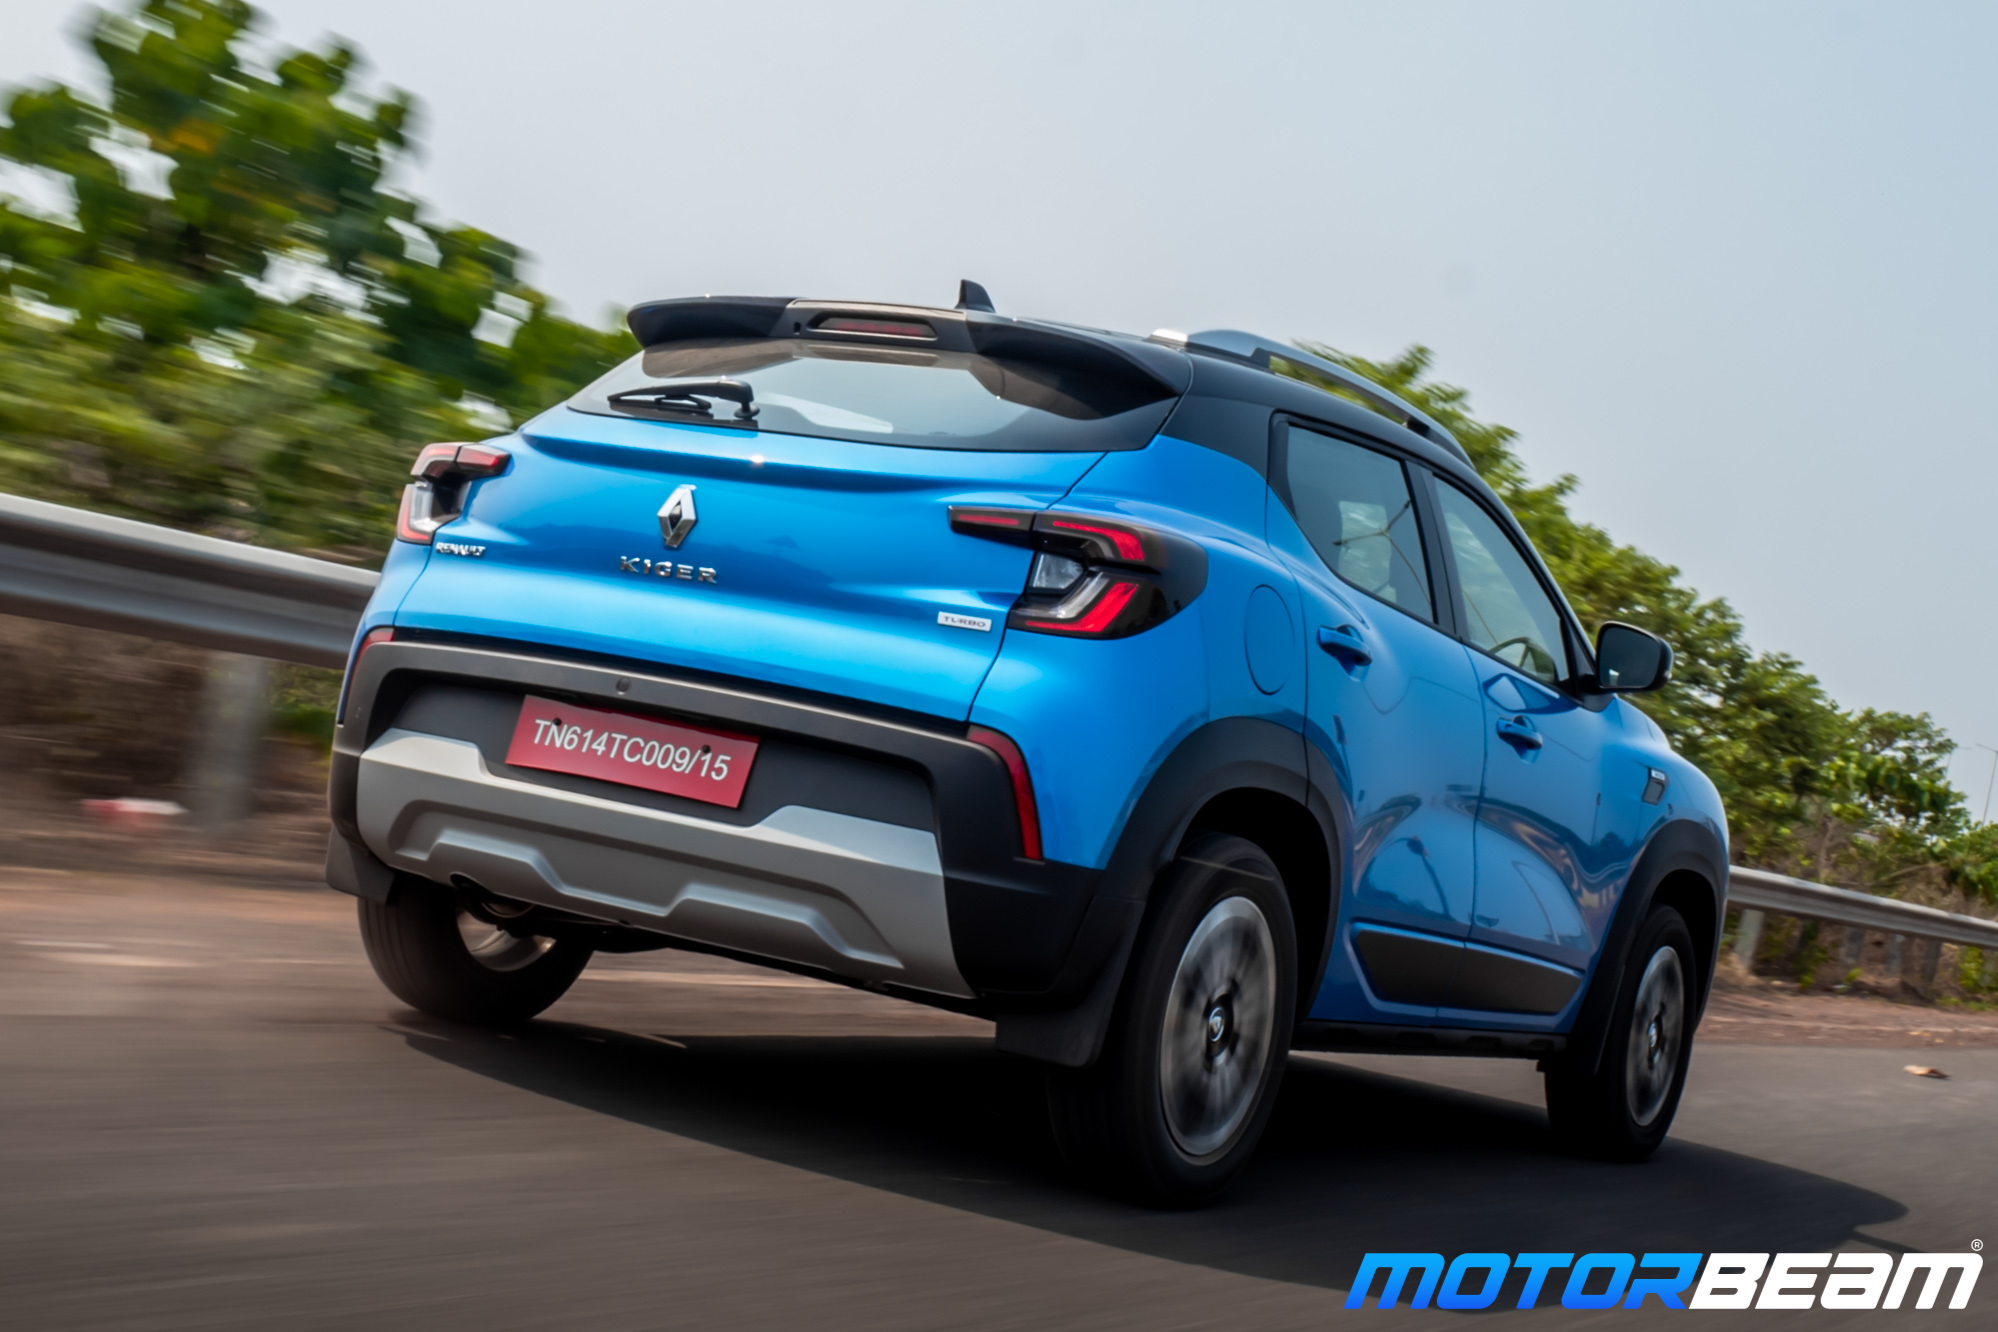 February 2022 Compact SUV Sales